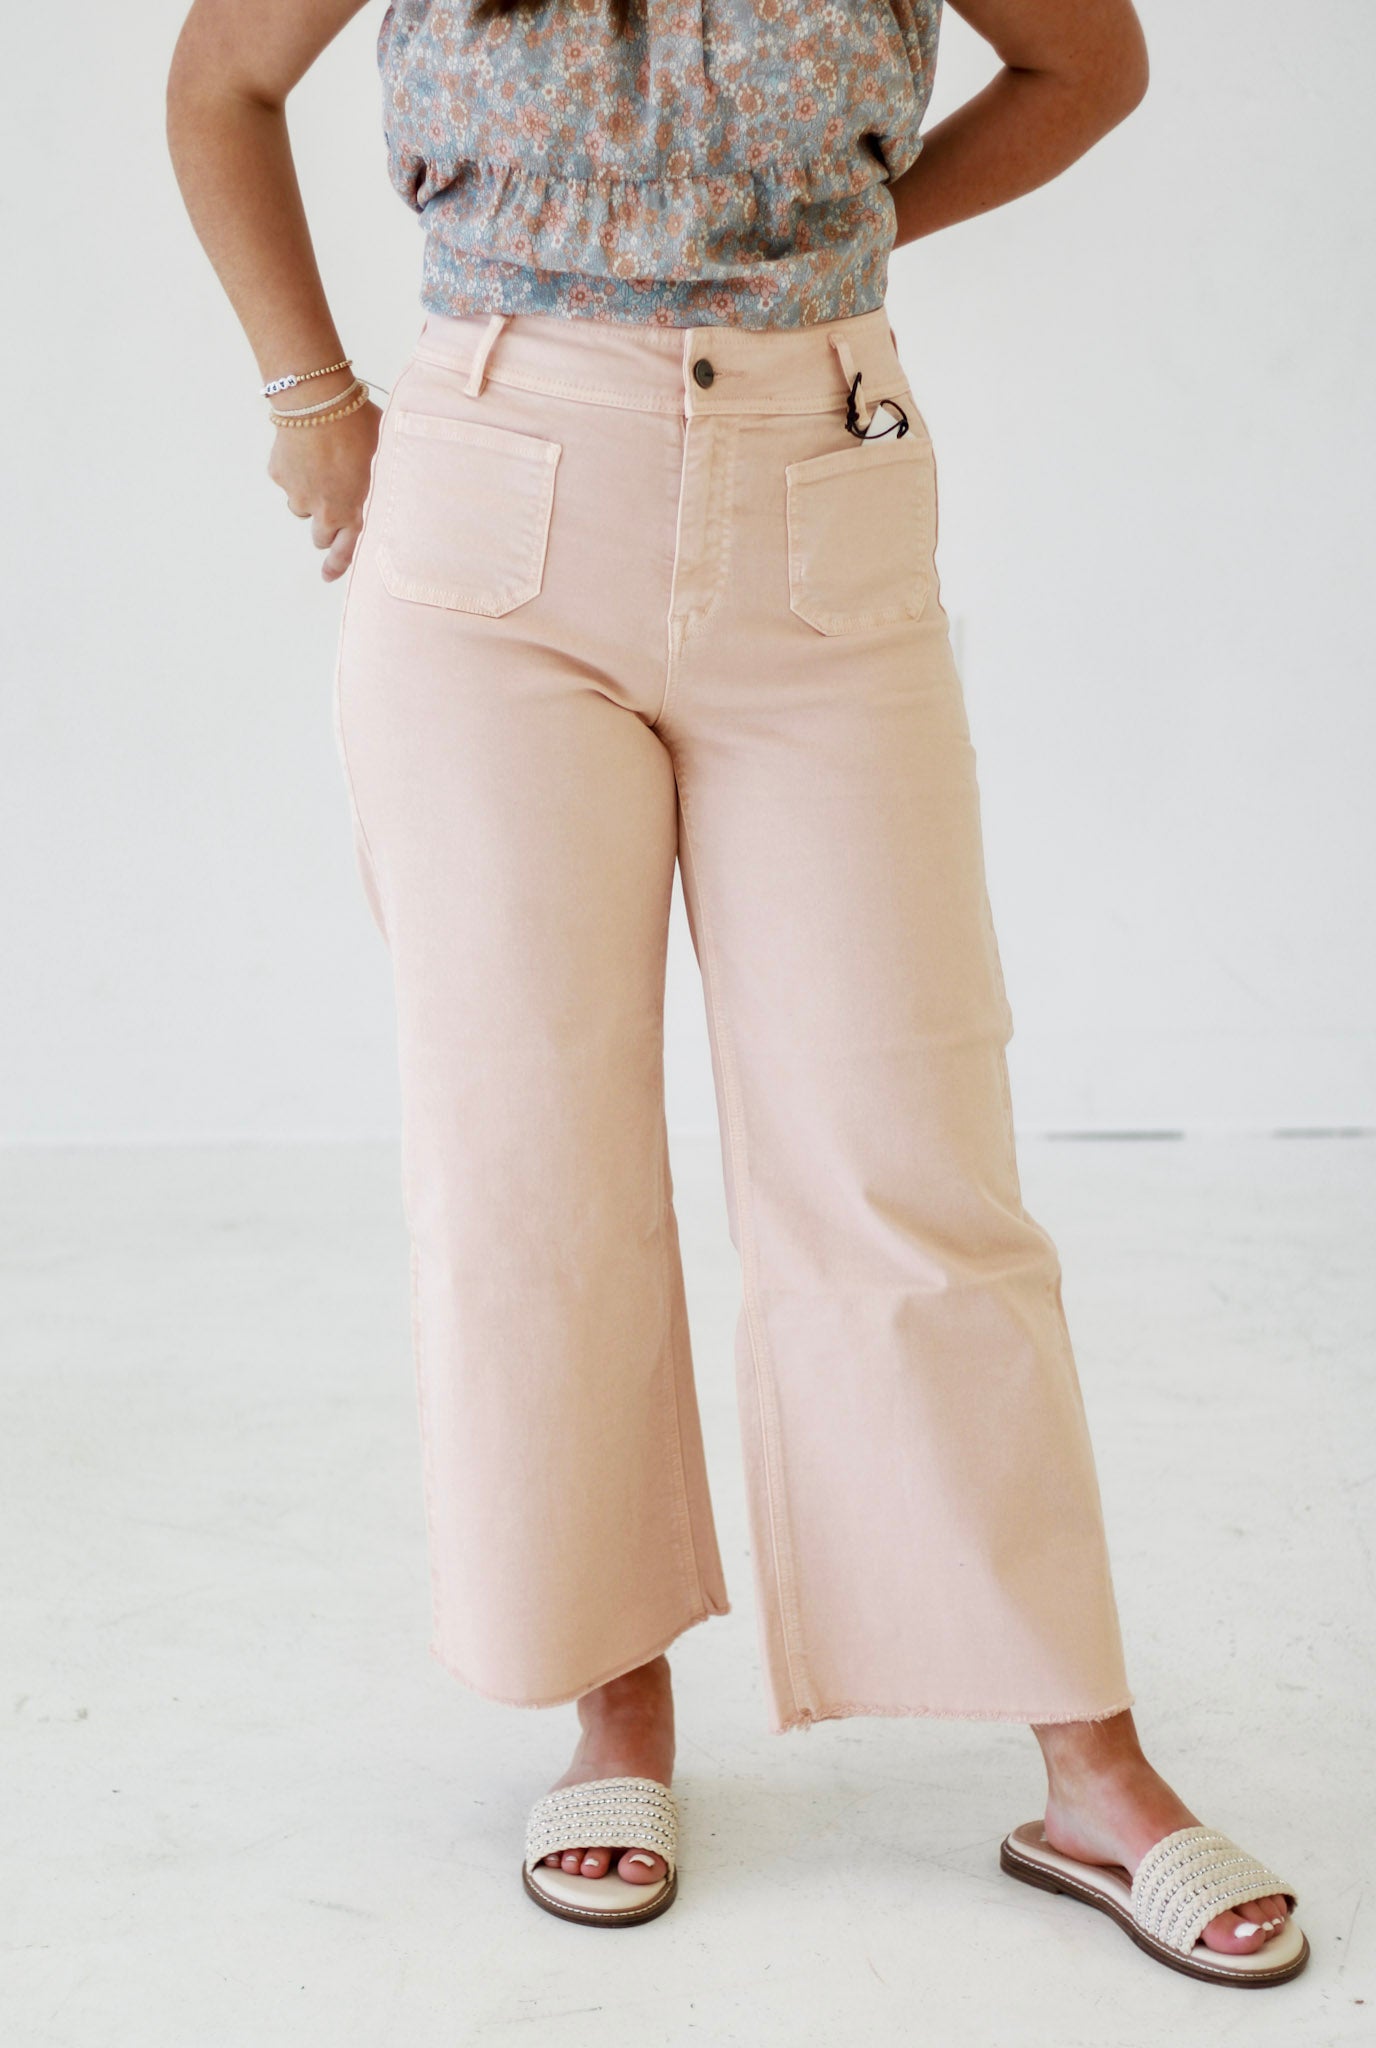 Summer Breeze Chic Cropped Wide Leg with Front Pocket in Spanish Villa